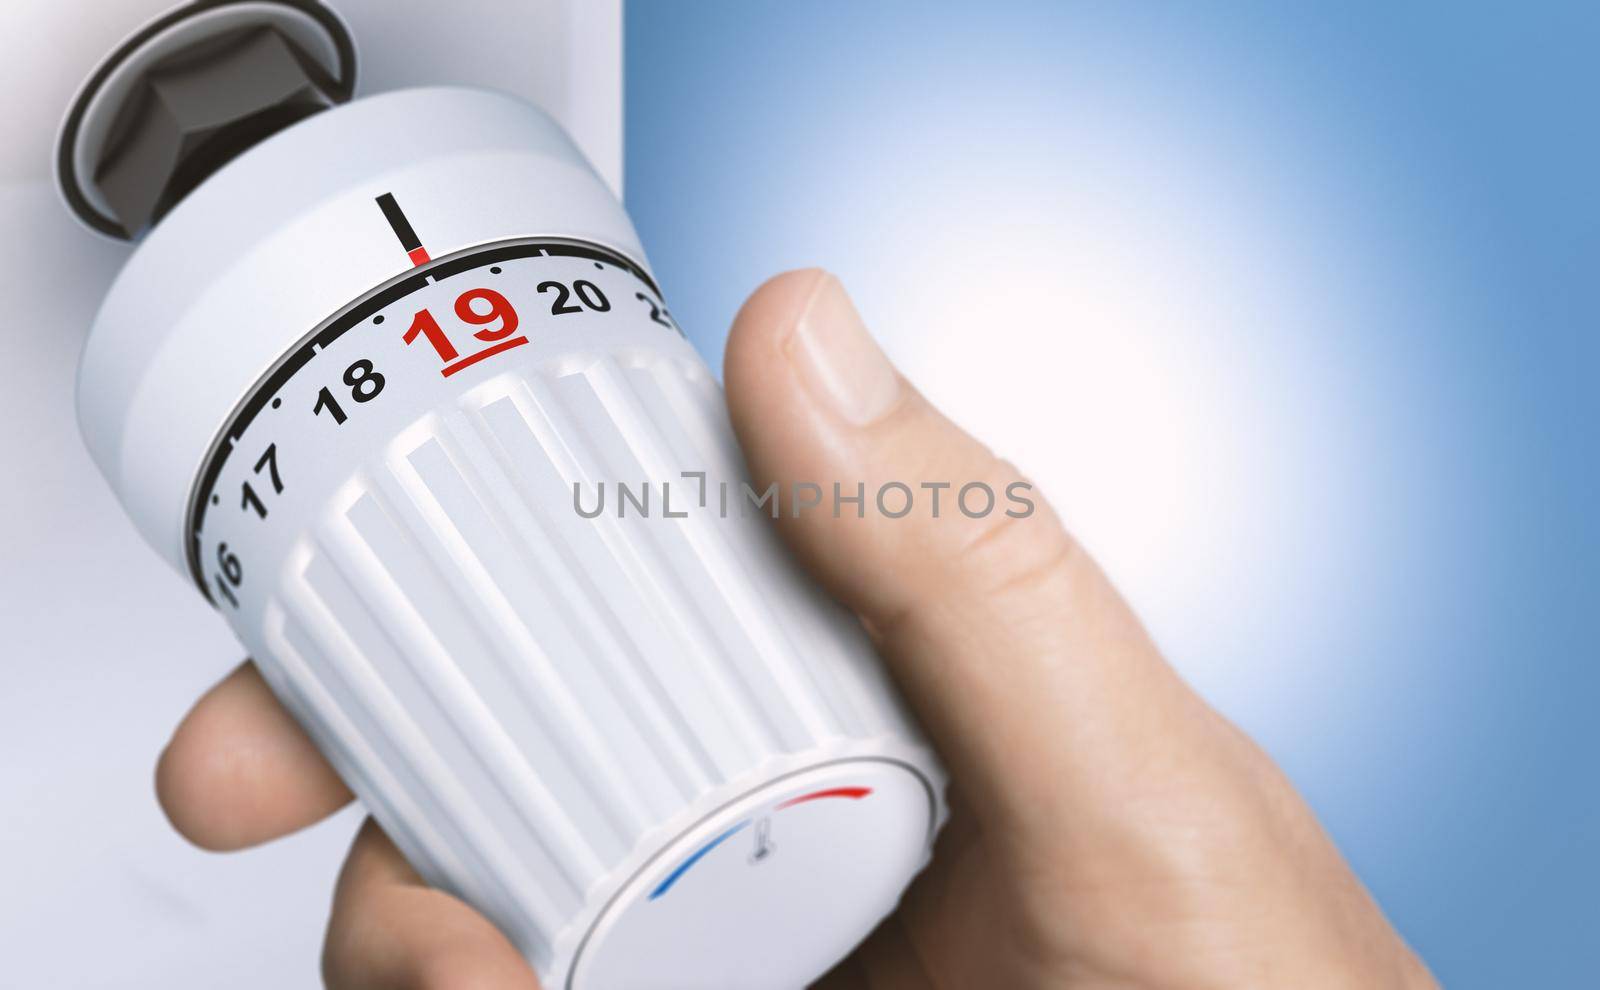 Man reducing energy consumption by setting thermostat temperature to 19 degrees. by Olivier-Le-Moal